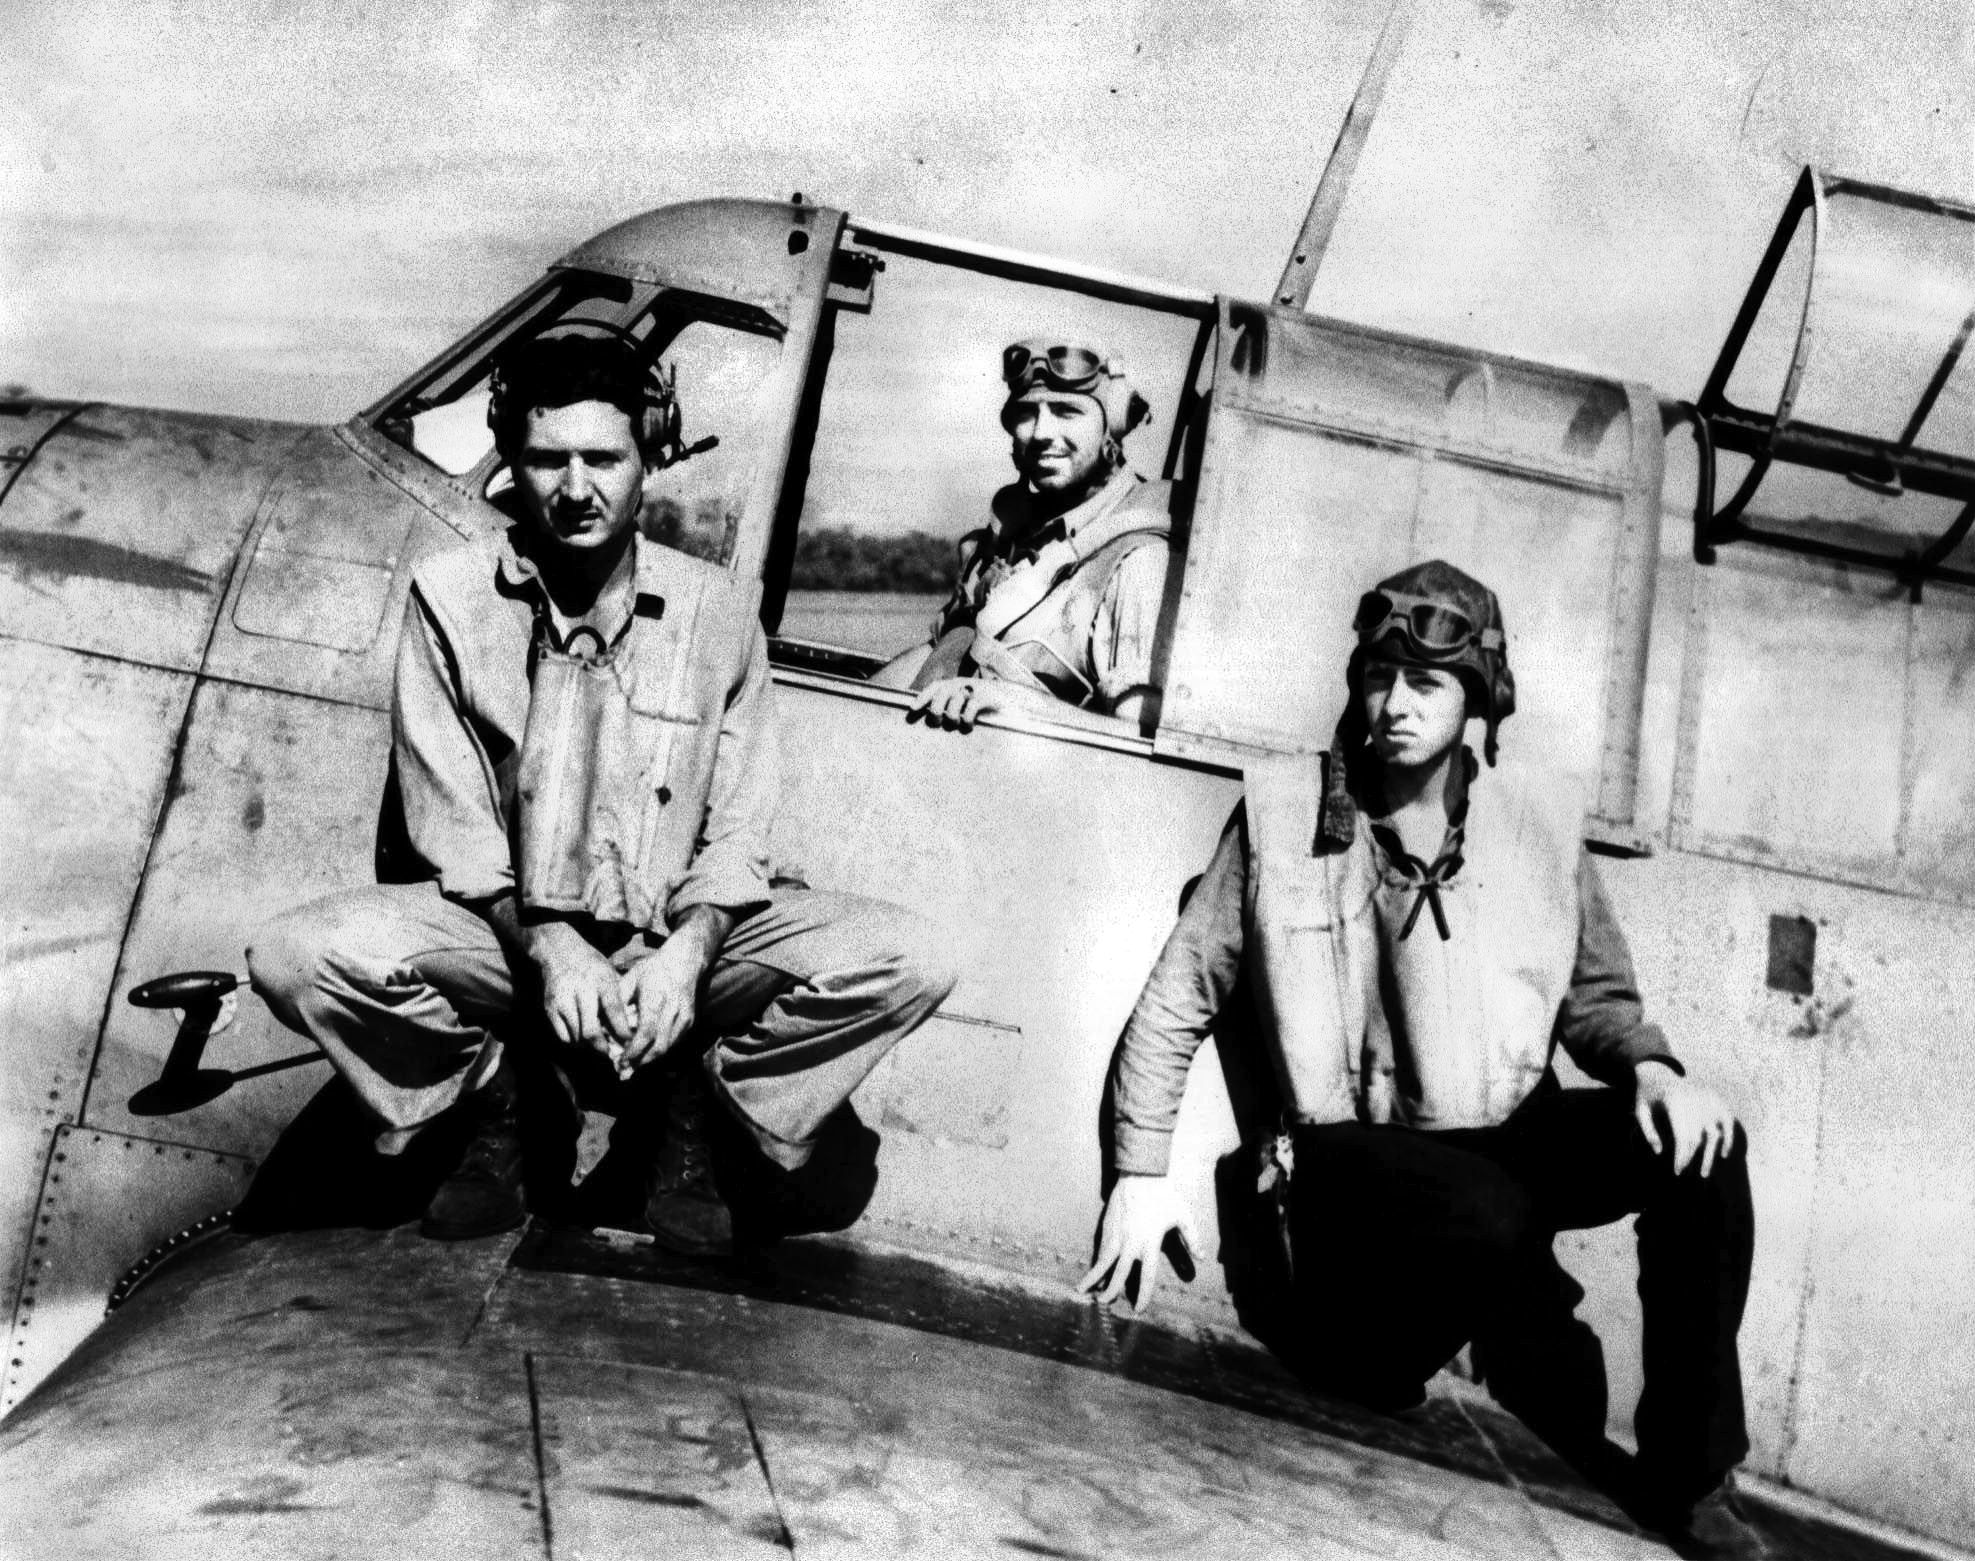 From left are replacement gunner Basil Rich, pilot Ensign Albert K. Earnest, and Radioman 3rd Class Harry H. Ferrier. During the Battle of Midway, Earnest, Ferrier and Seaman 1st Class Jay D. Manning flew with a detachment of six TBFs from Midway. Manning was killed in action, but their plane was the only one of Torpedo 8 to survive the day. The Japanese shot down Five of the TBFs and all 15 TBDs launched from the USS Hornet.